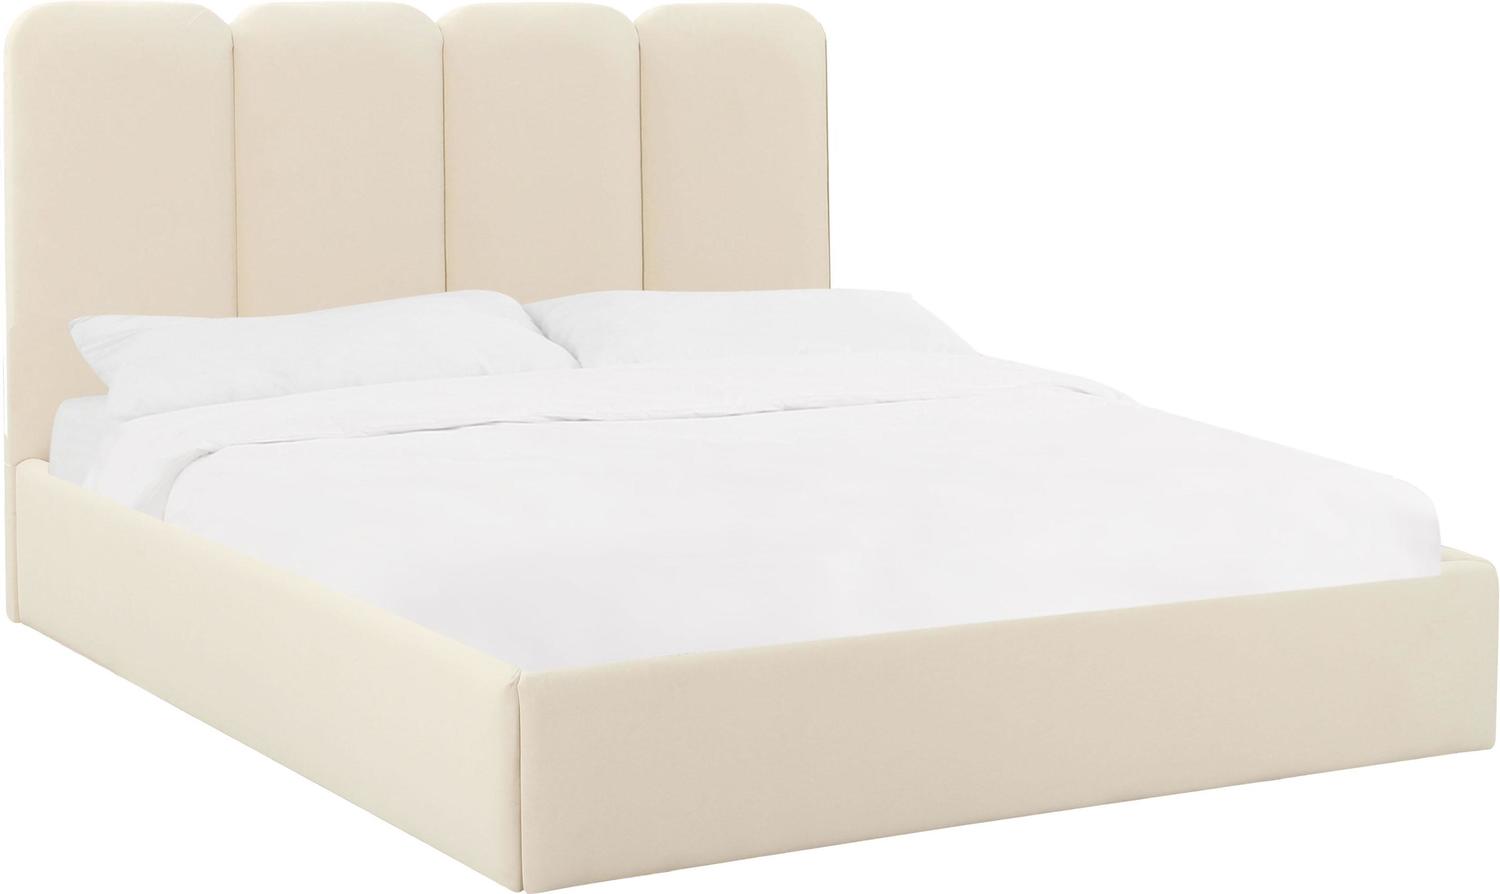 bed and bed frame set queen Tov Furniture Beds Cream